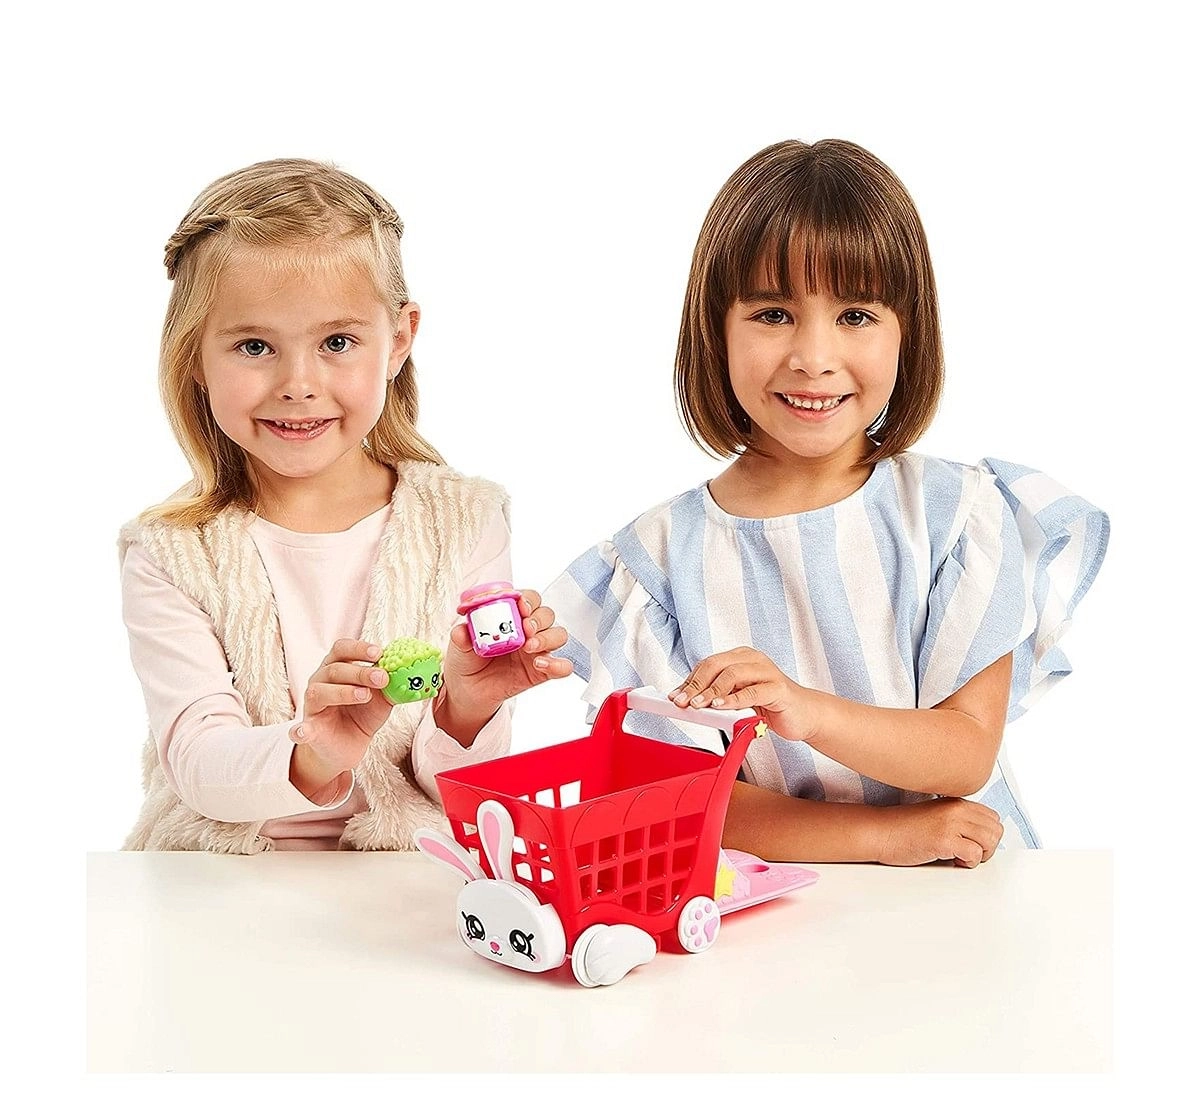  Kindi Kids S1 Fun Shopping Cart Dolls & Accessories for Kids age 3Y+ 